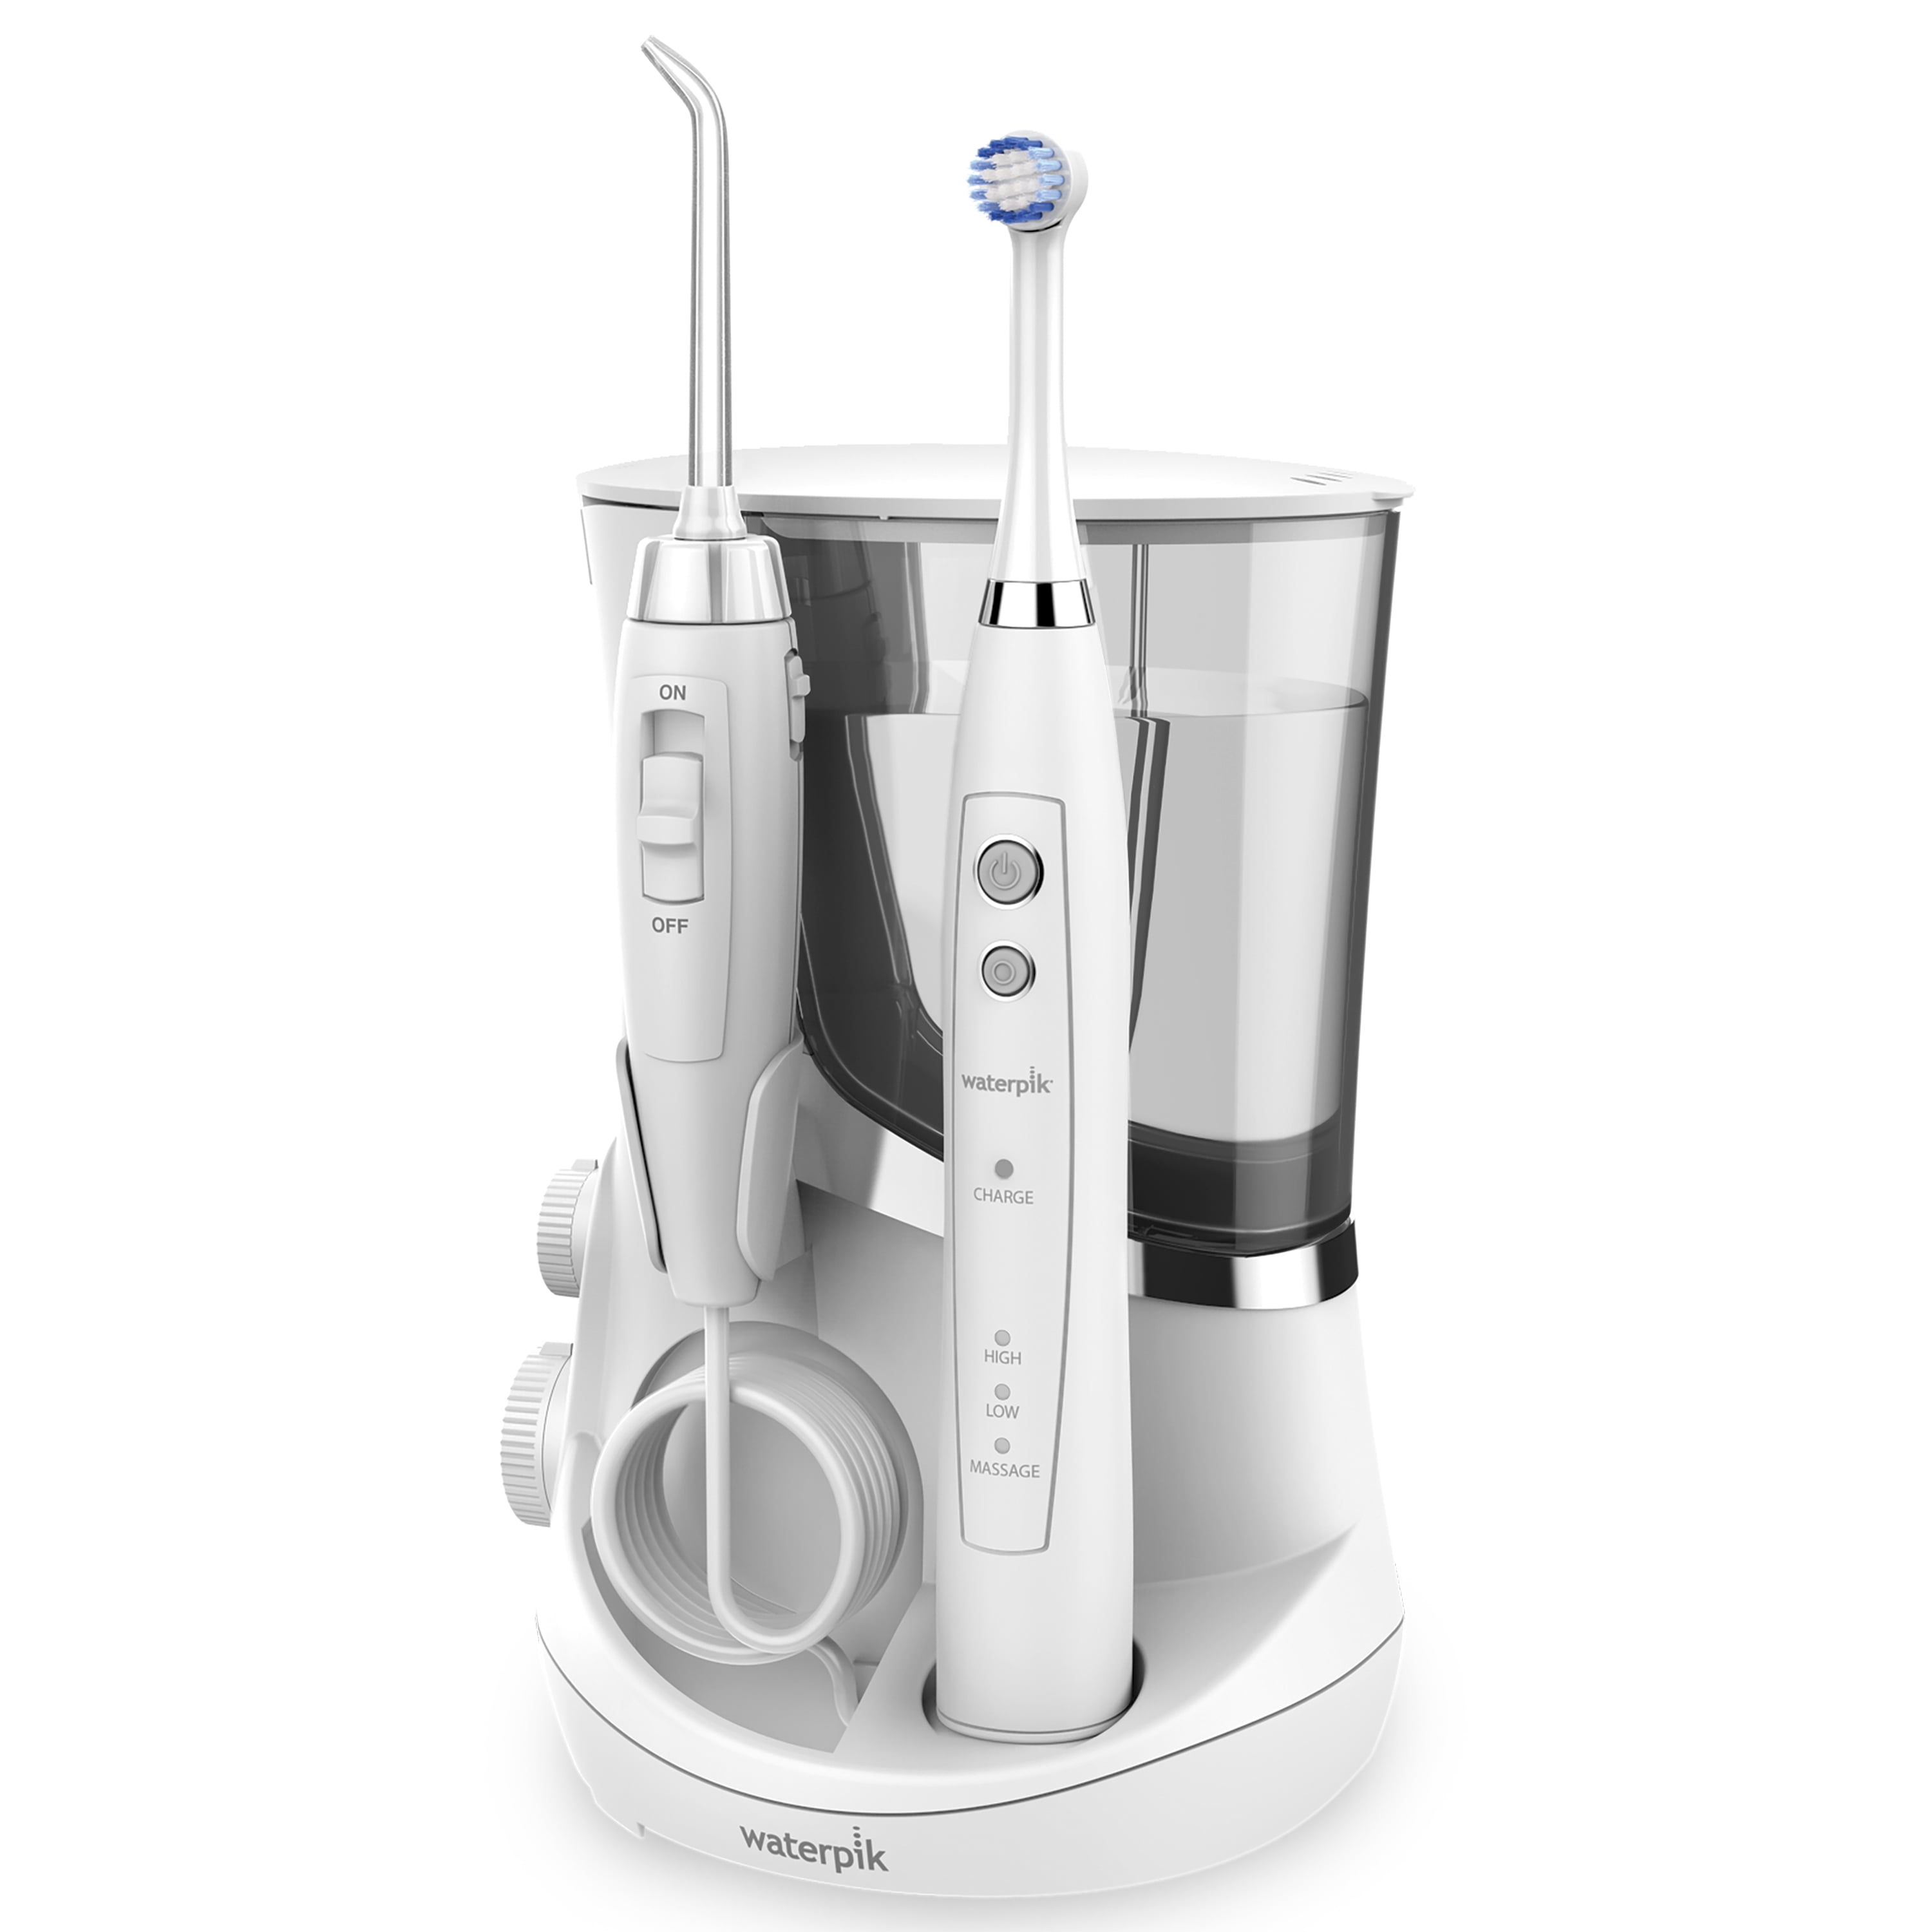 Waterpik Complete Care 5.5 Water Flosser and Oscillating Toothbrush